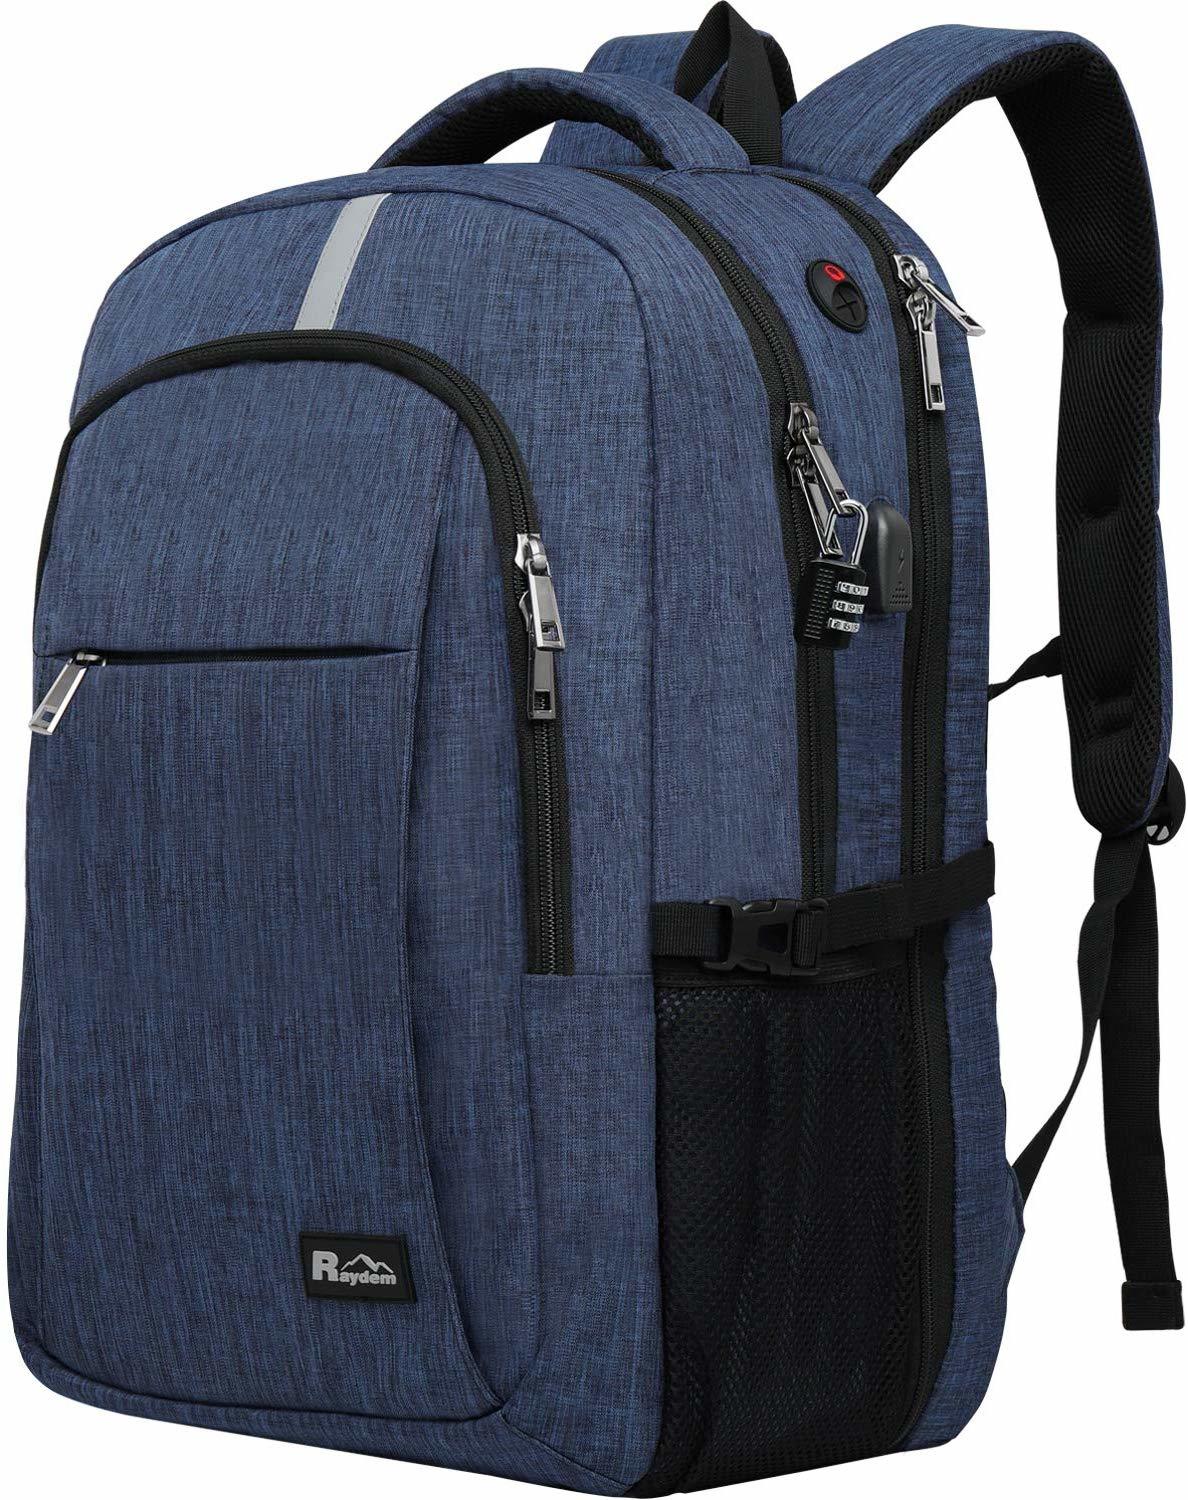 10 Backpack with a Laptop Compartment Suitable for Traveling 9